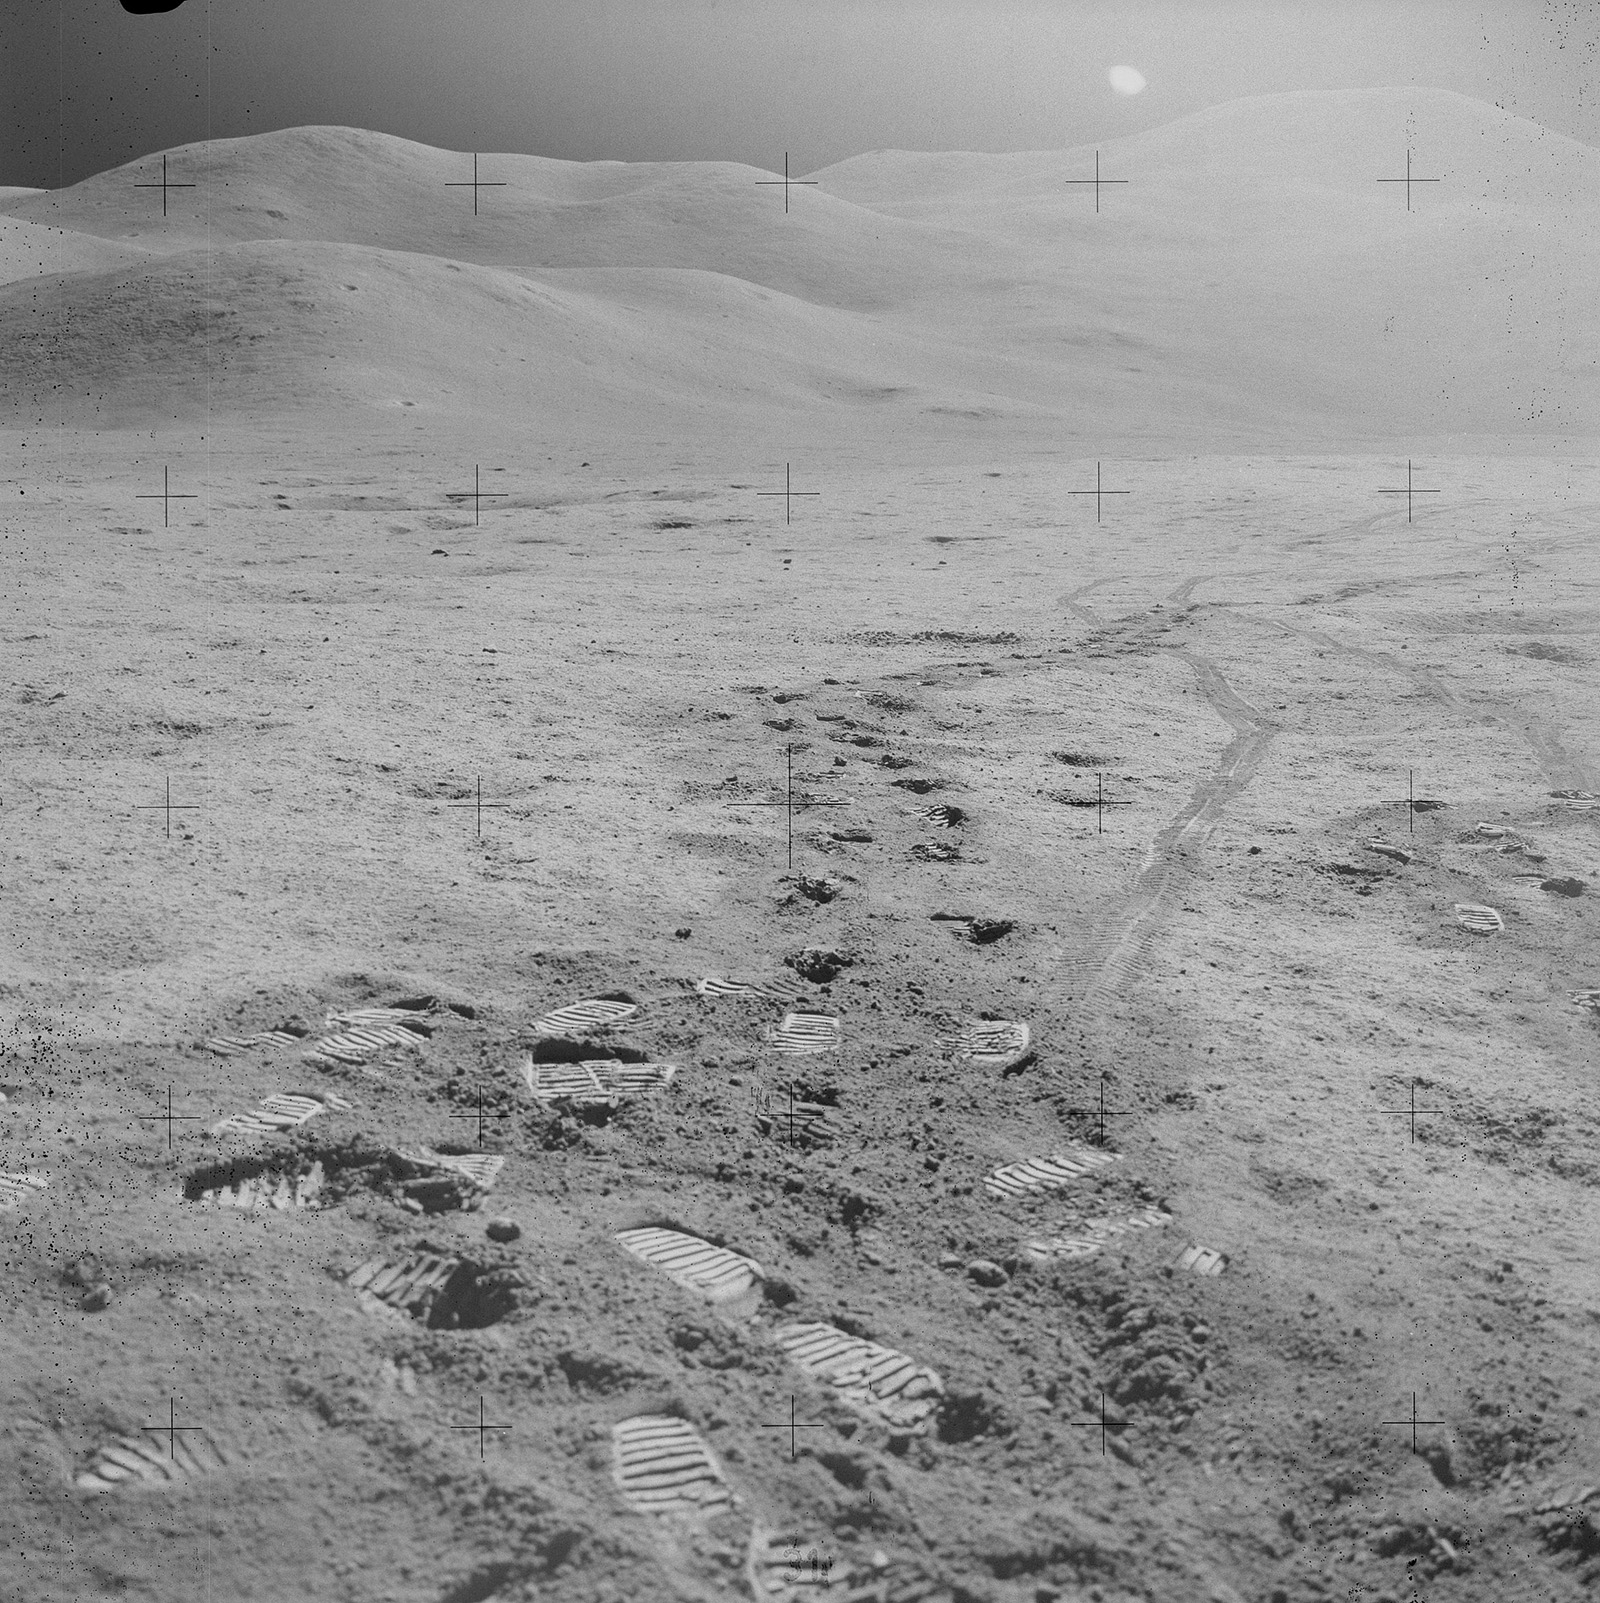 Grayscale image of a barren landscape. The Sun is visible in a dark sky. In the foreground, scattered bootprints show where astronauts have worked. More bootprints and rover wheel tracks lead into the distance, towards a lumpy mountain range. The lunar surface appears to have a fine, powdery texture, with some rocks.